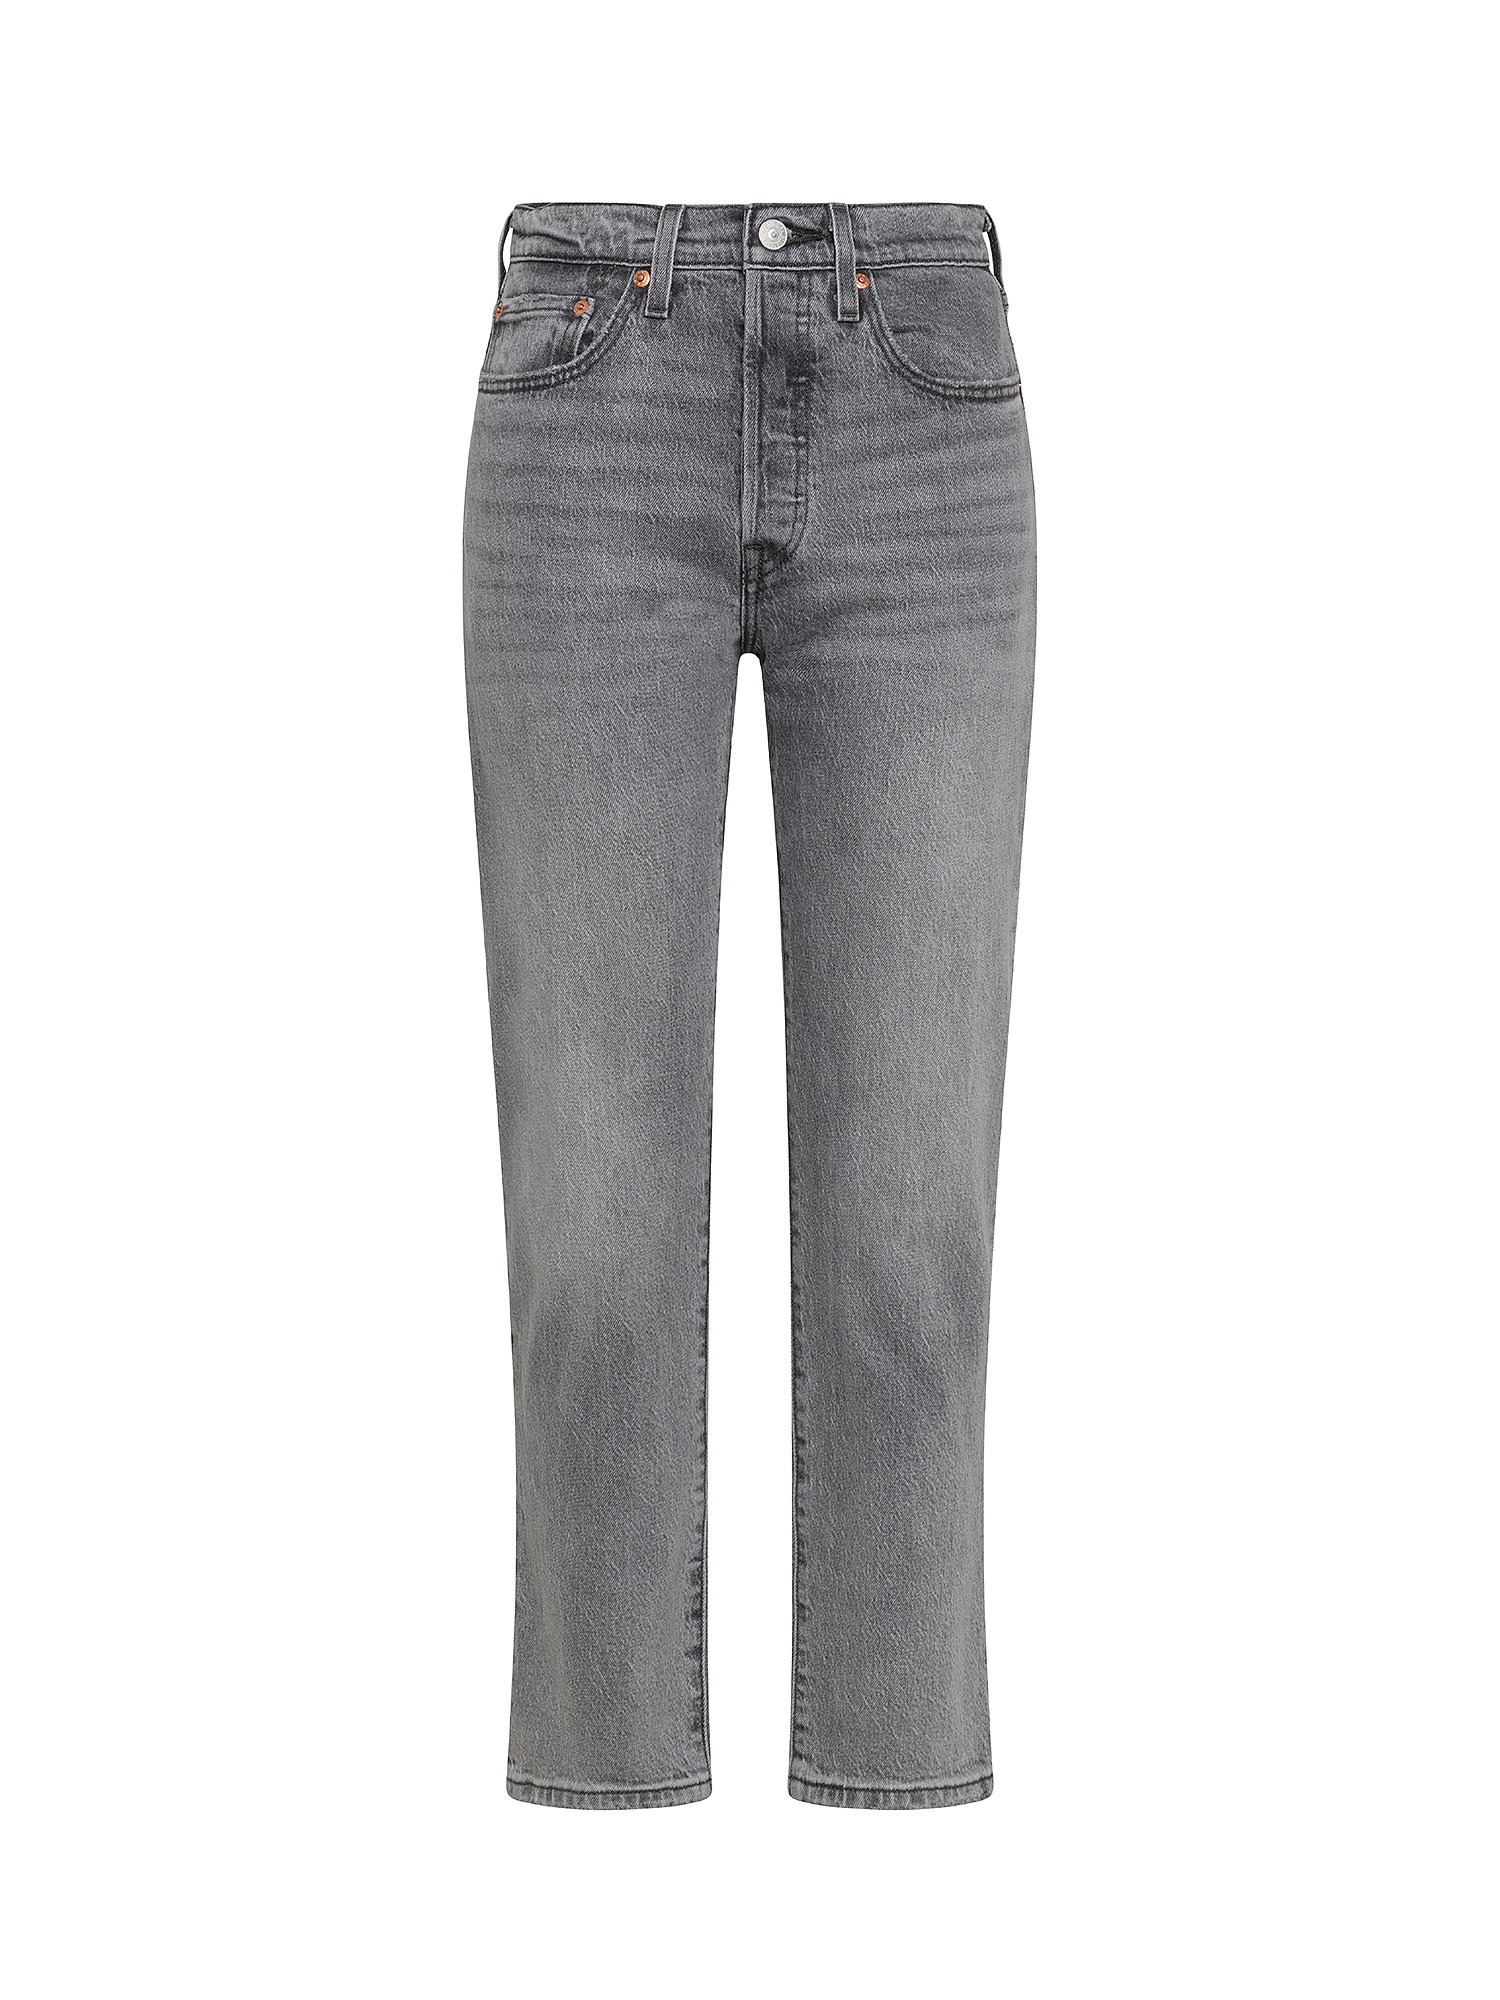 Levi's - jeans 501® cropped, Grigio, large image number 0